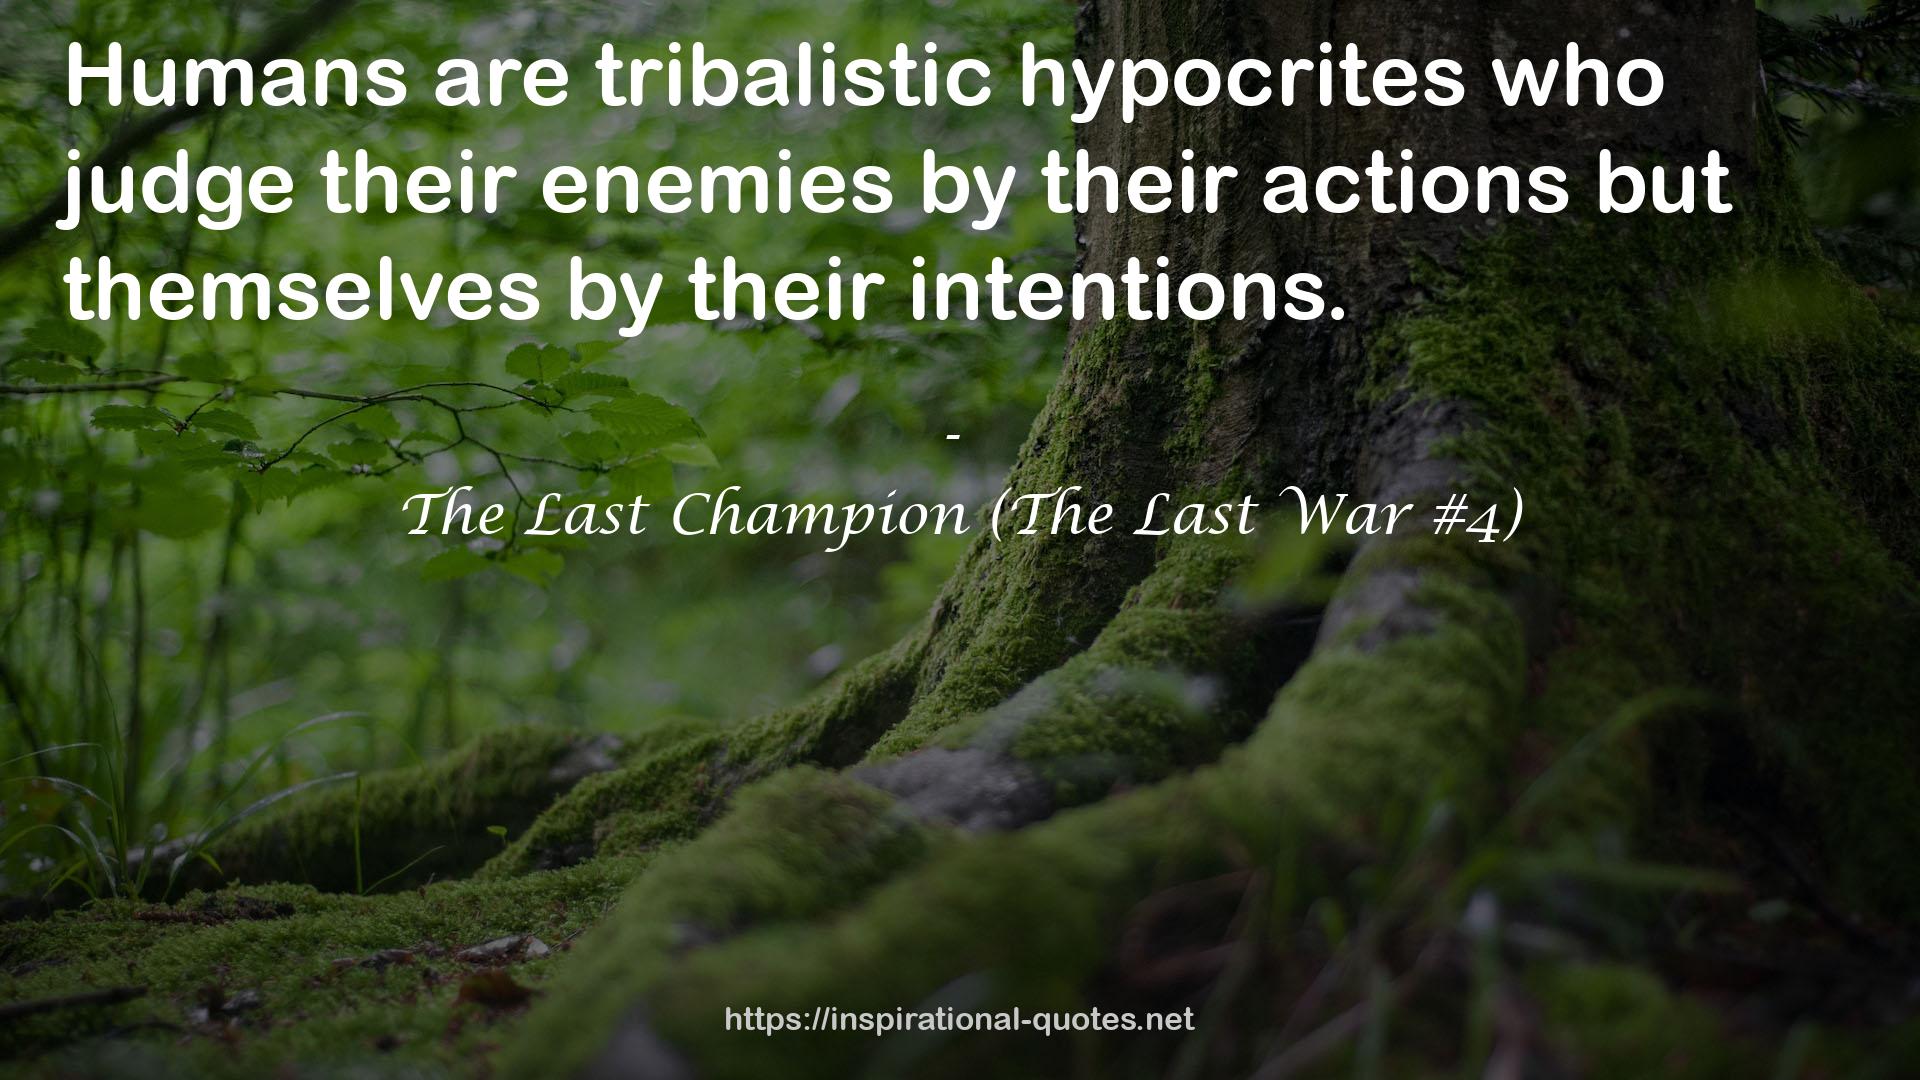 The Last Champion (The Last War #4) QUOTES